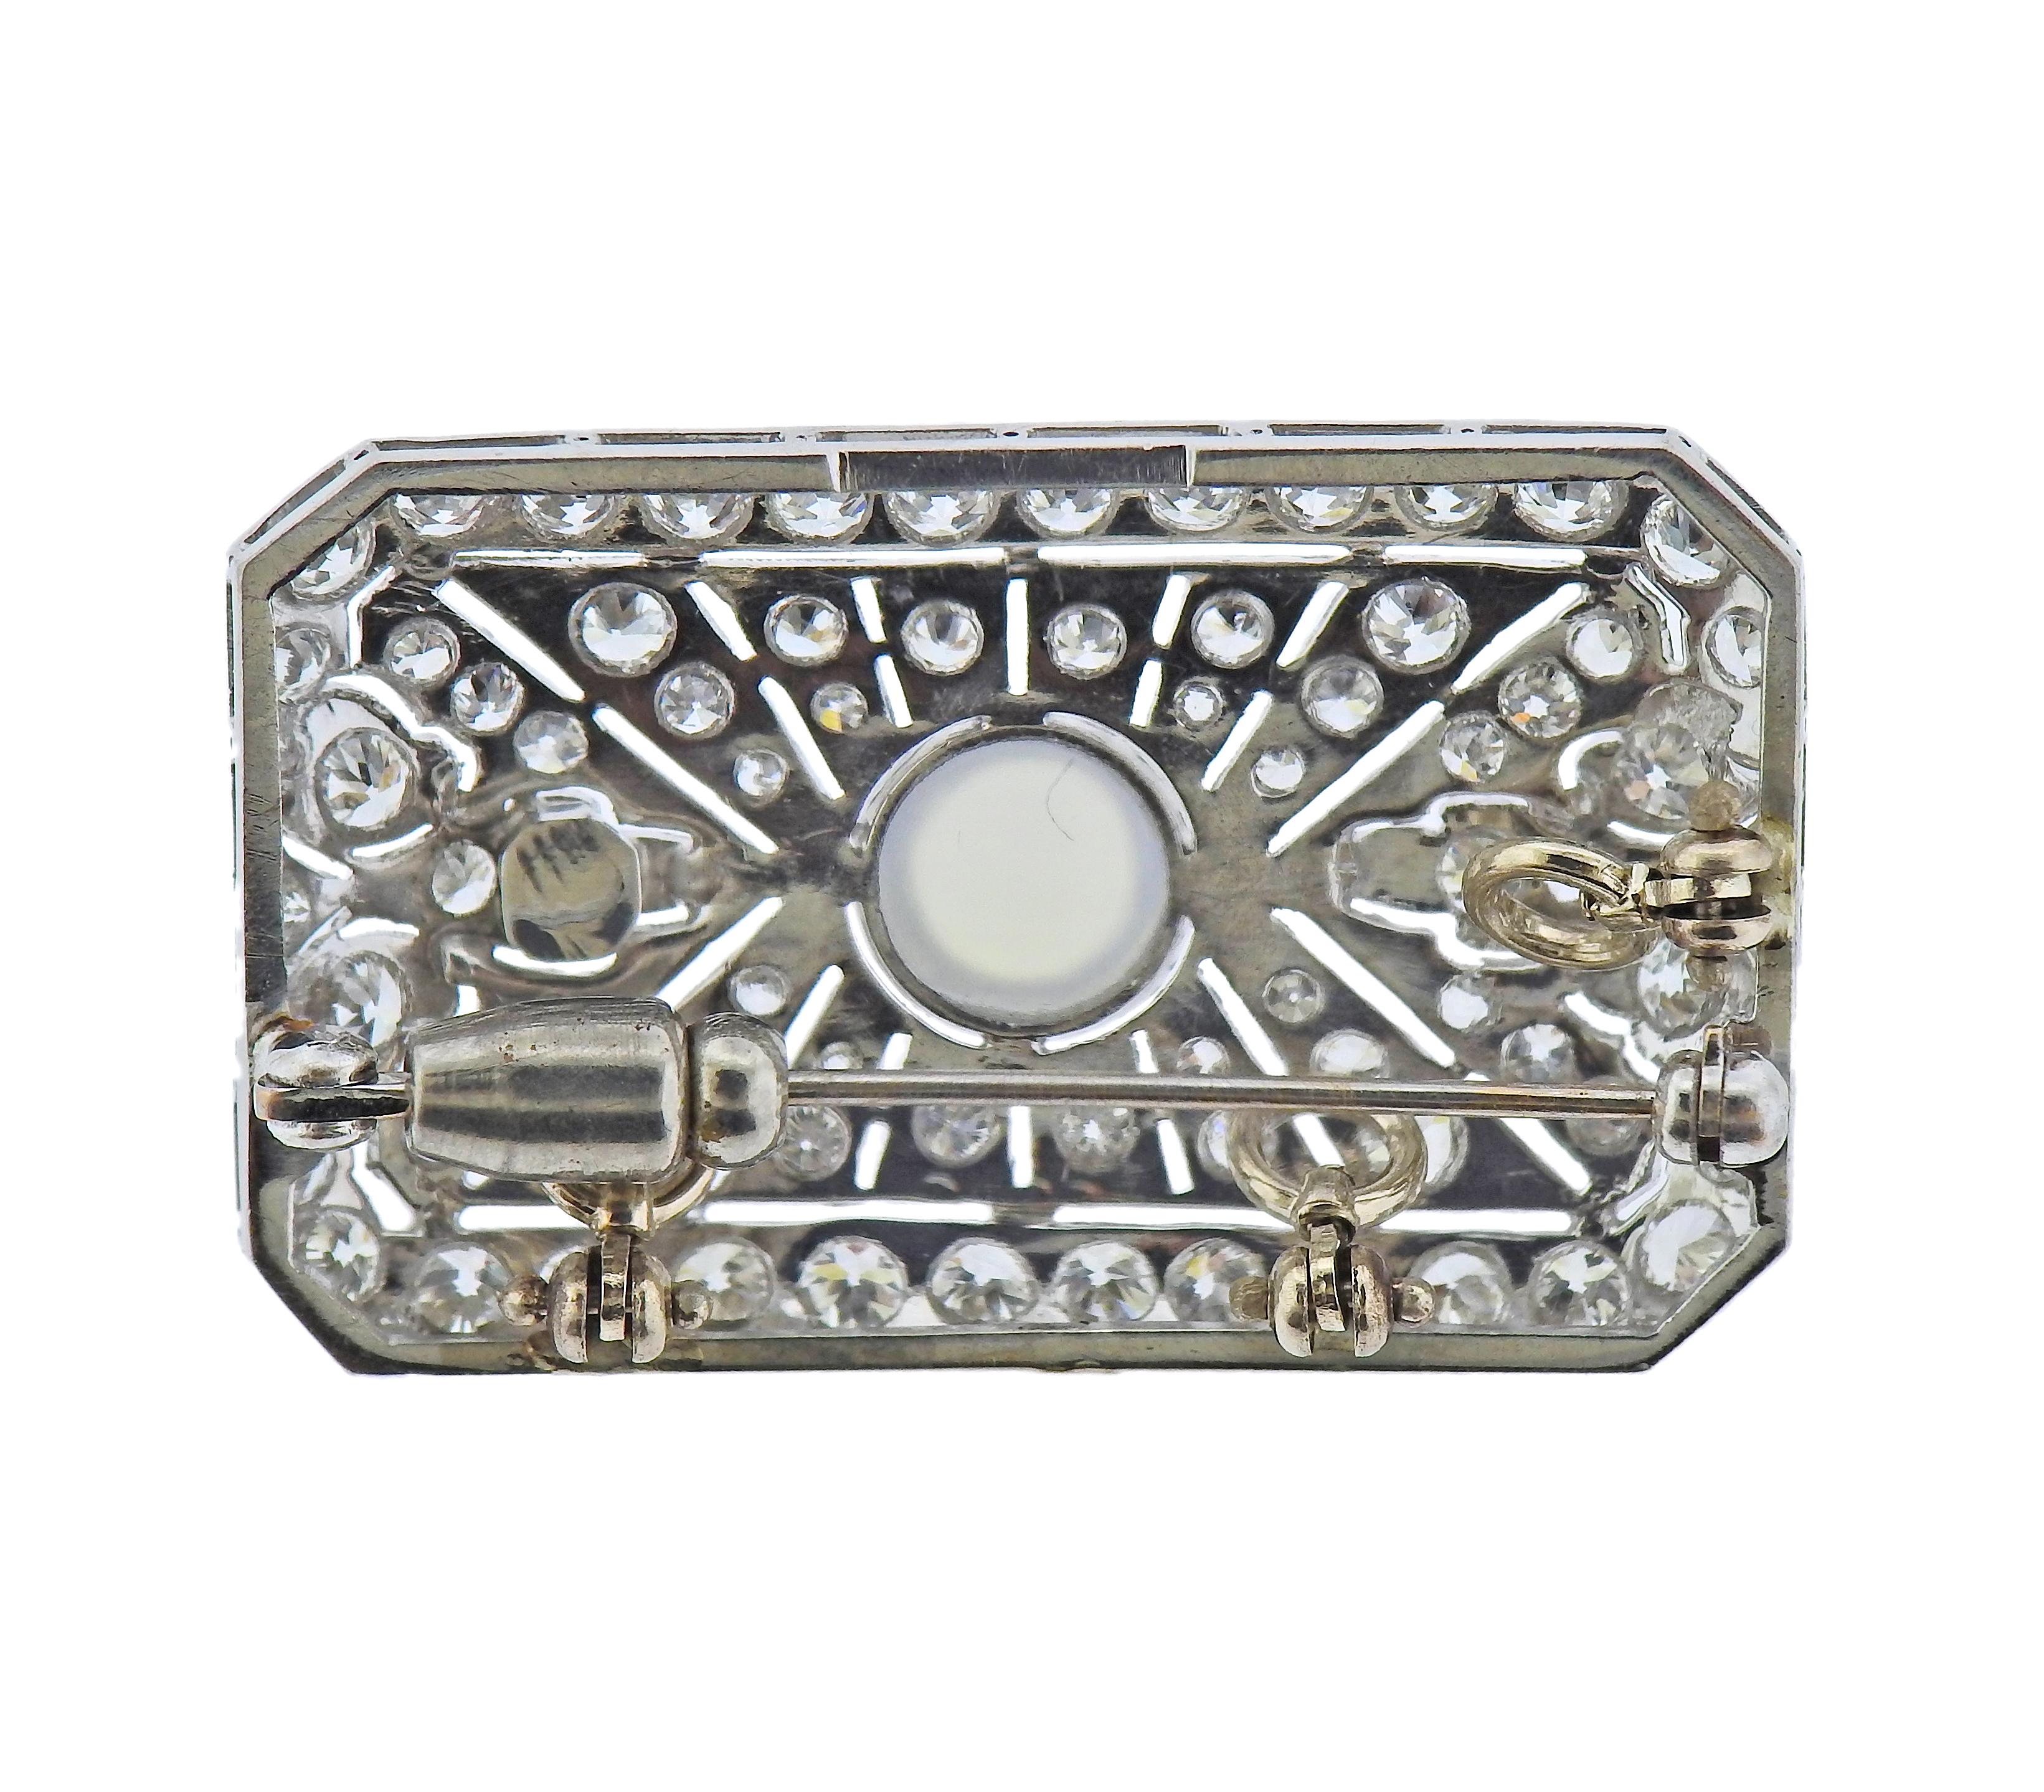 18k gold rectangular brooch/pendant, set with 7.3mm moonstone and approx. 2.20ctw in diamonds. Brooch is 35mm x 22mm. Weight - 9.1 grams.